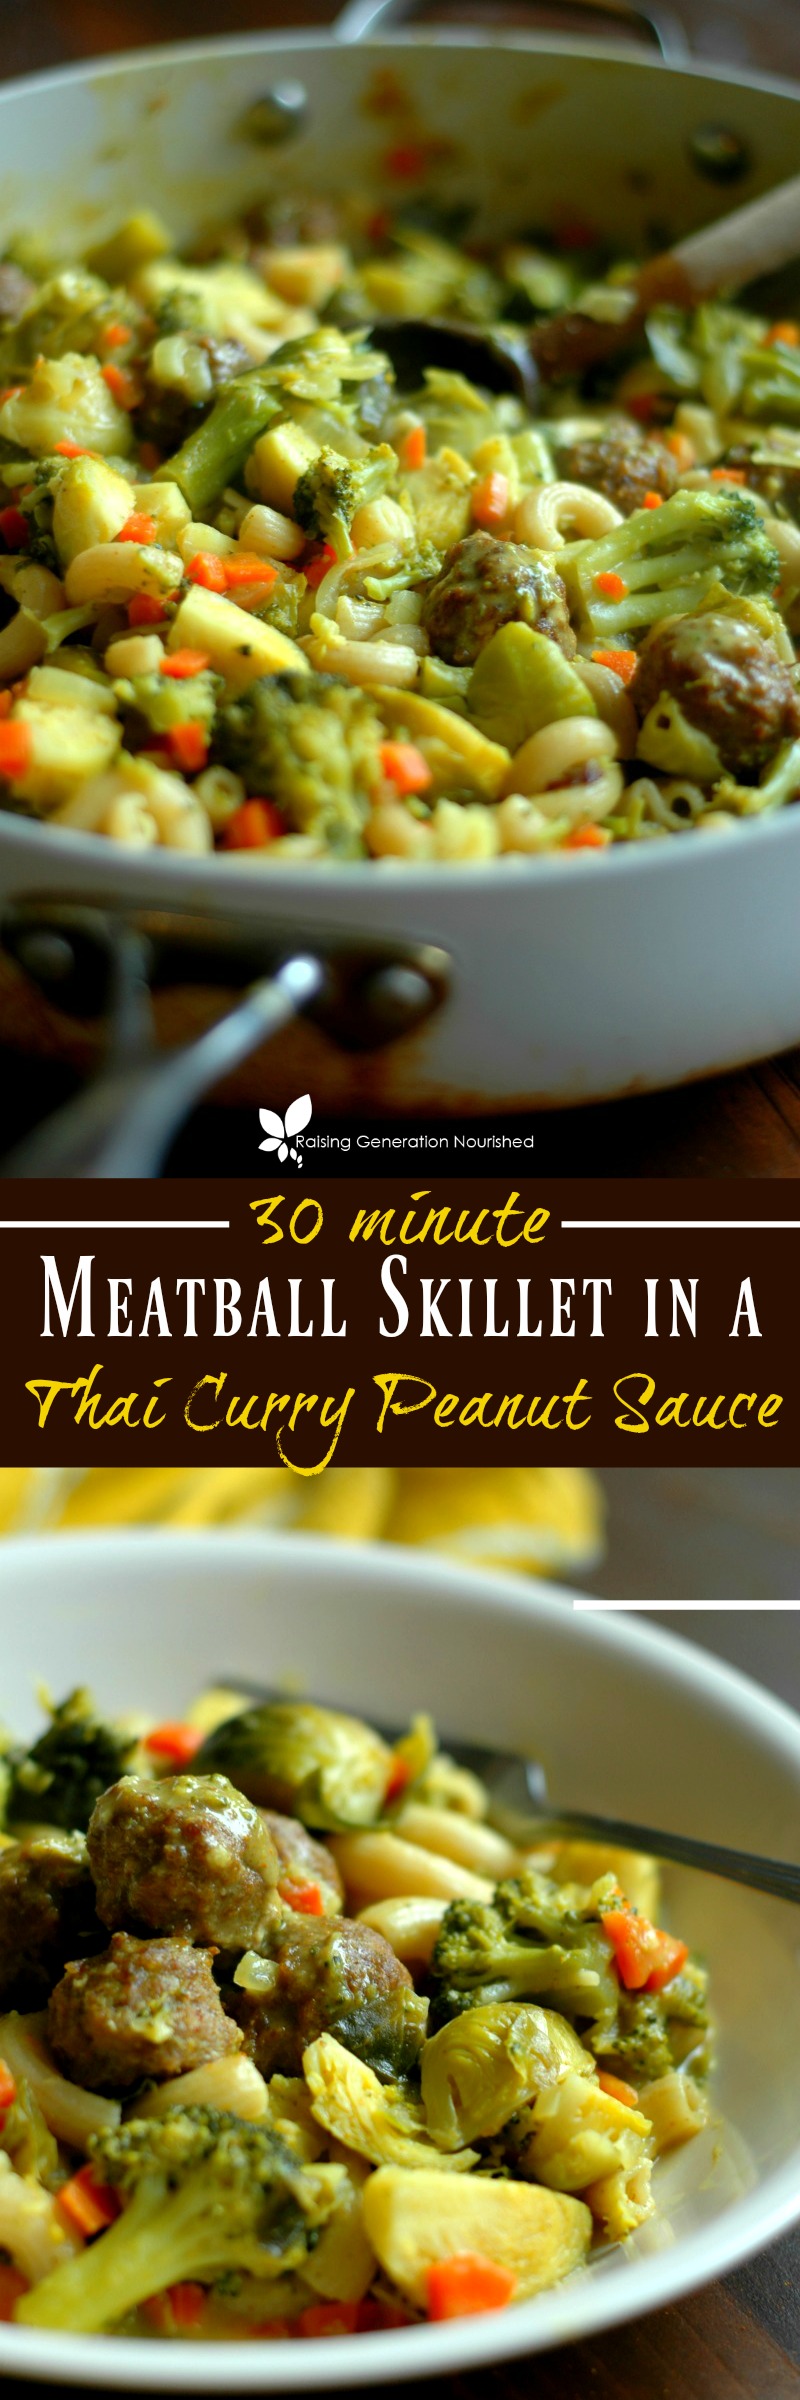 30 Minute Meatball Skillet in a Curry Peanut Sauce :: Nut Free Options Included!